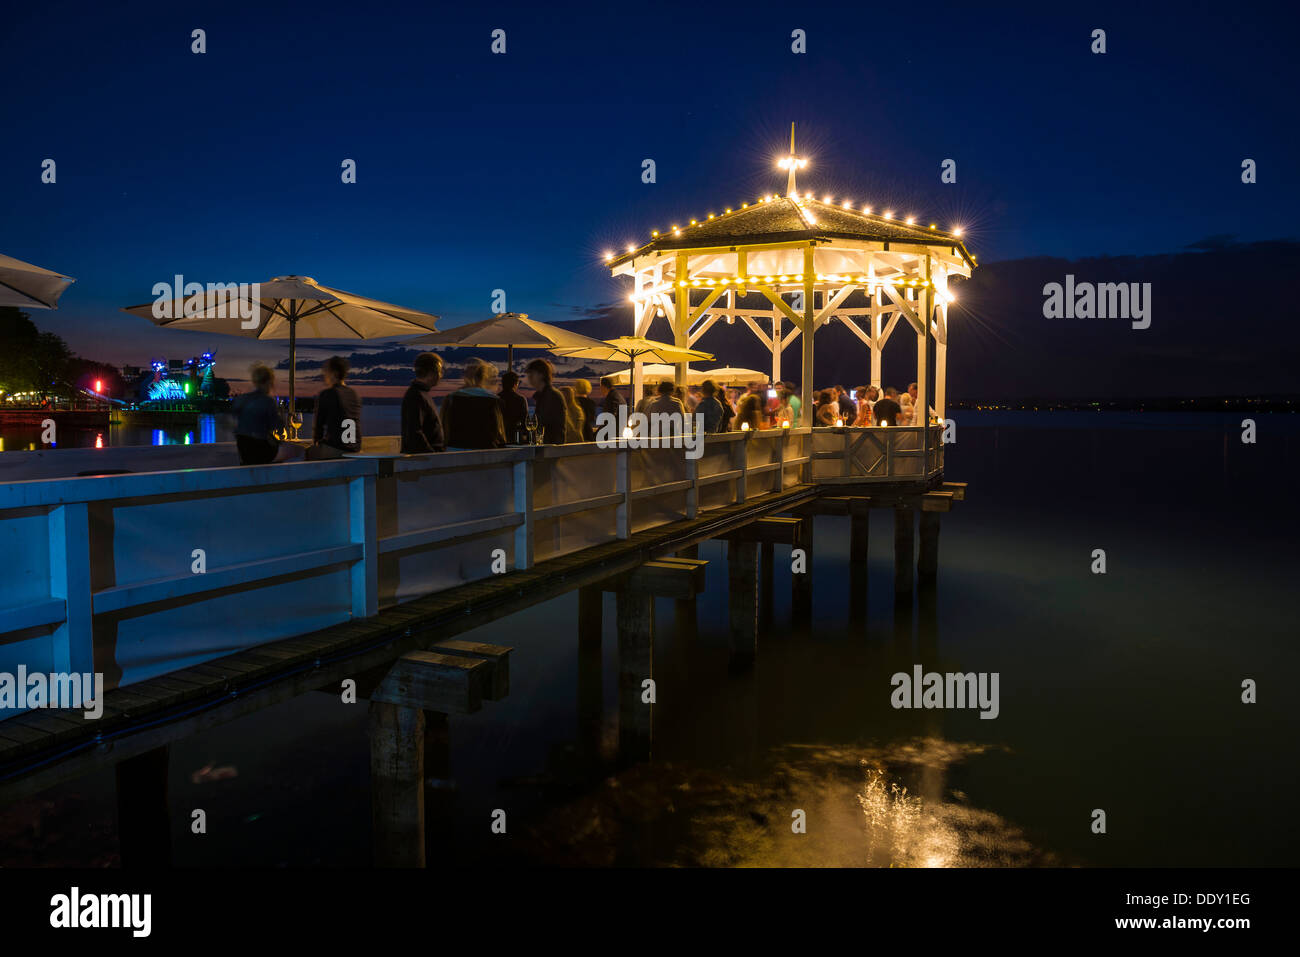 Pavilion with a bar on Lake Constance, night scene Stock Photo